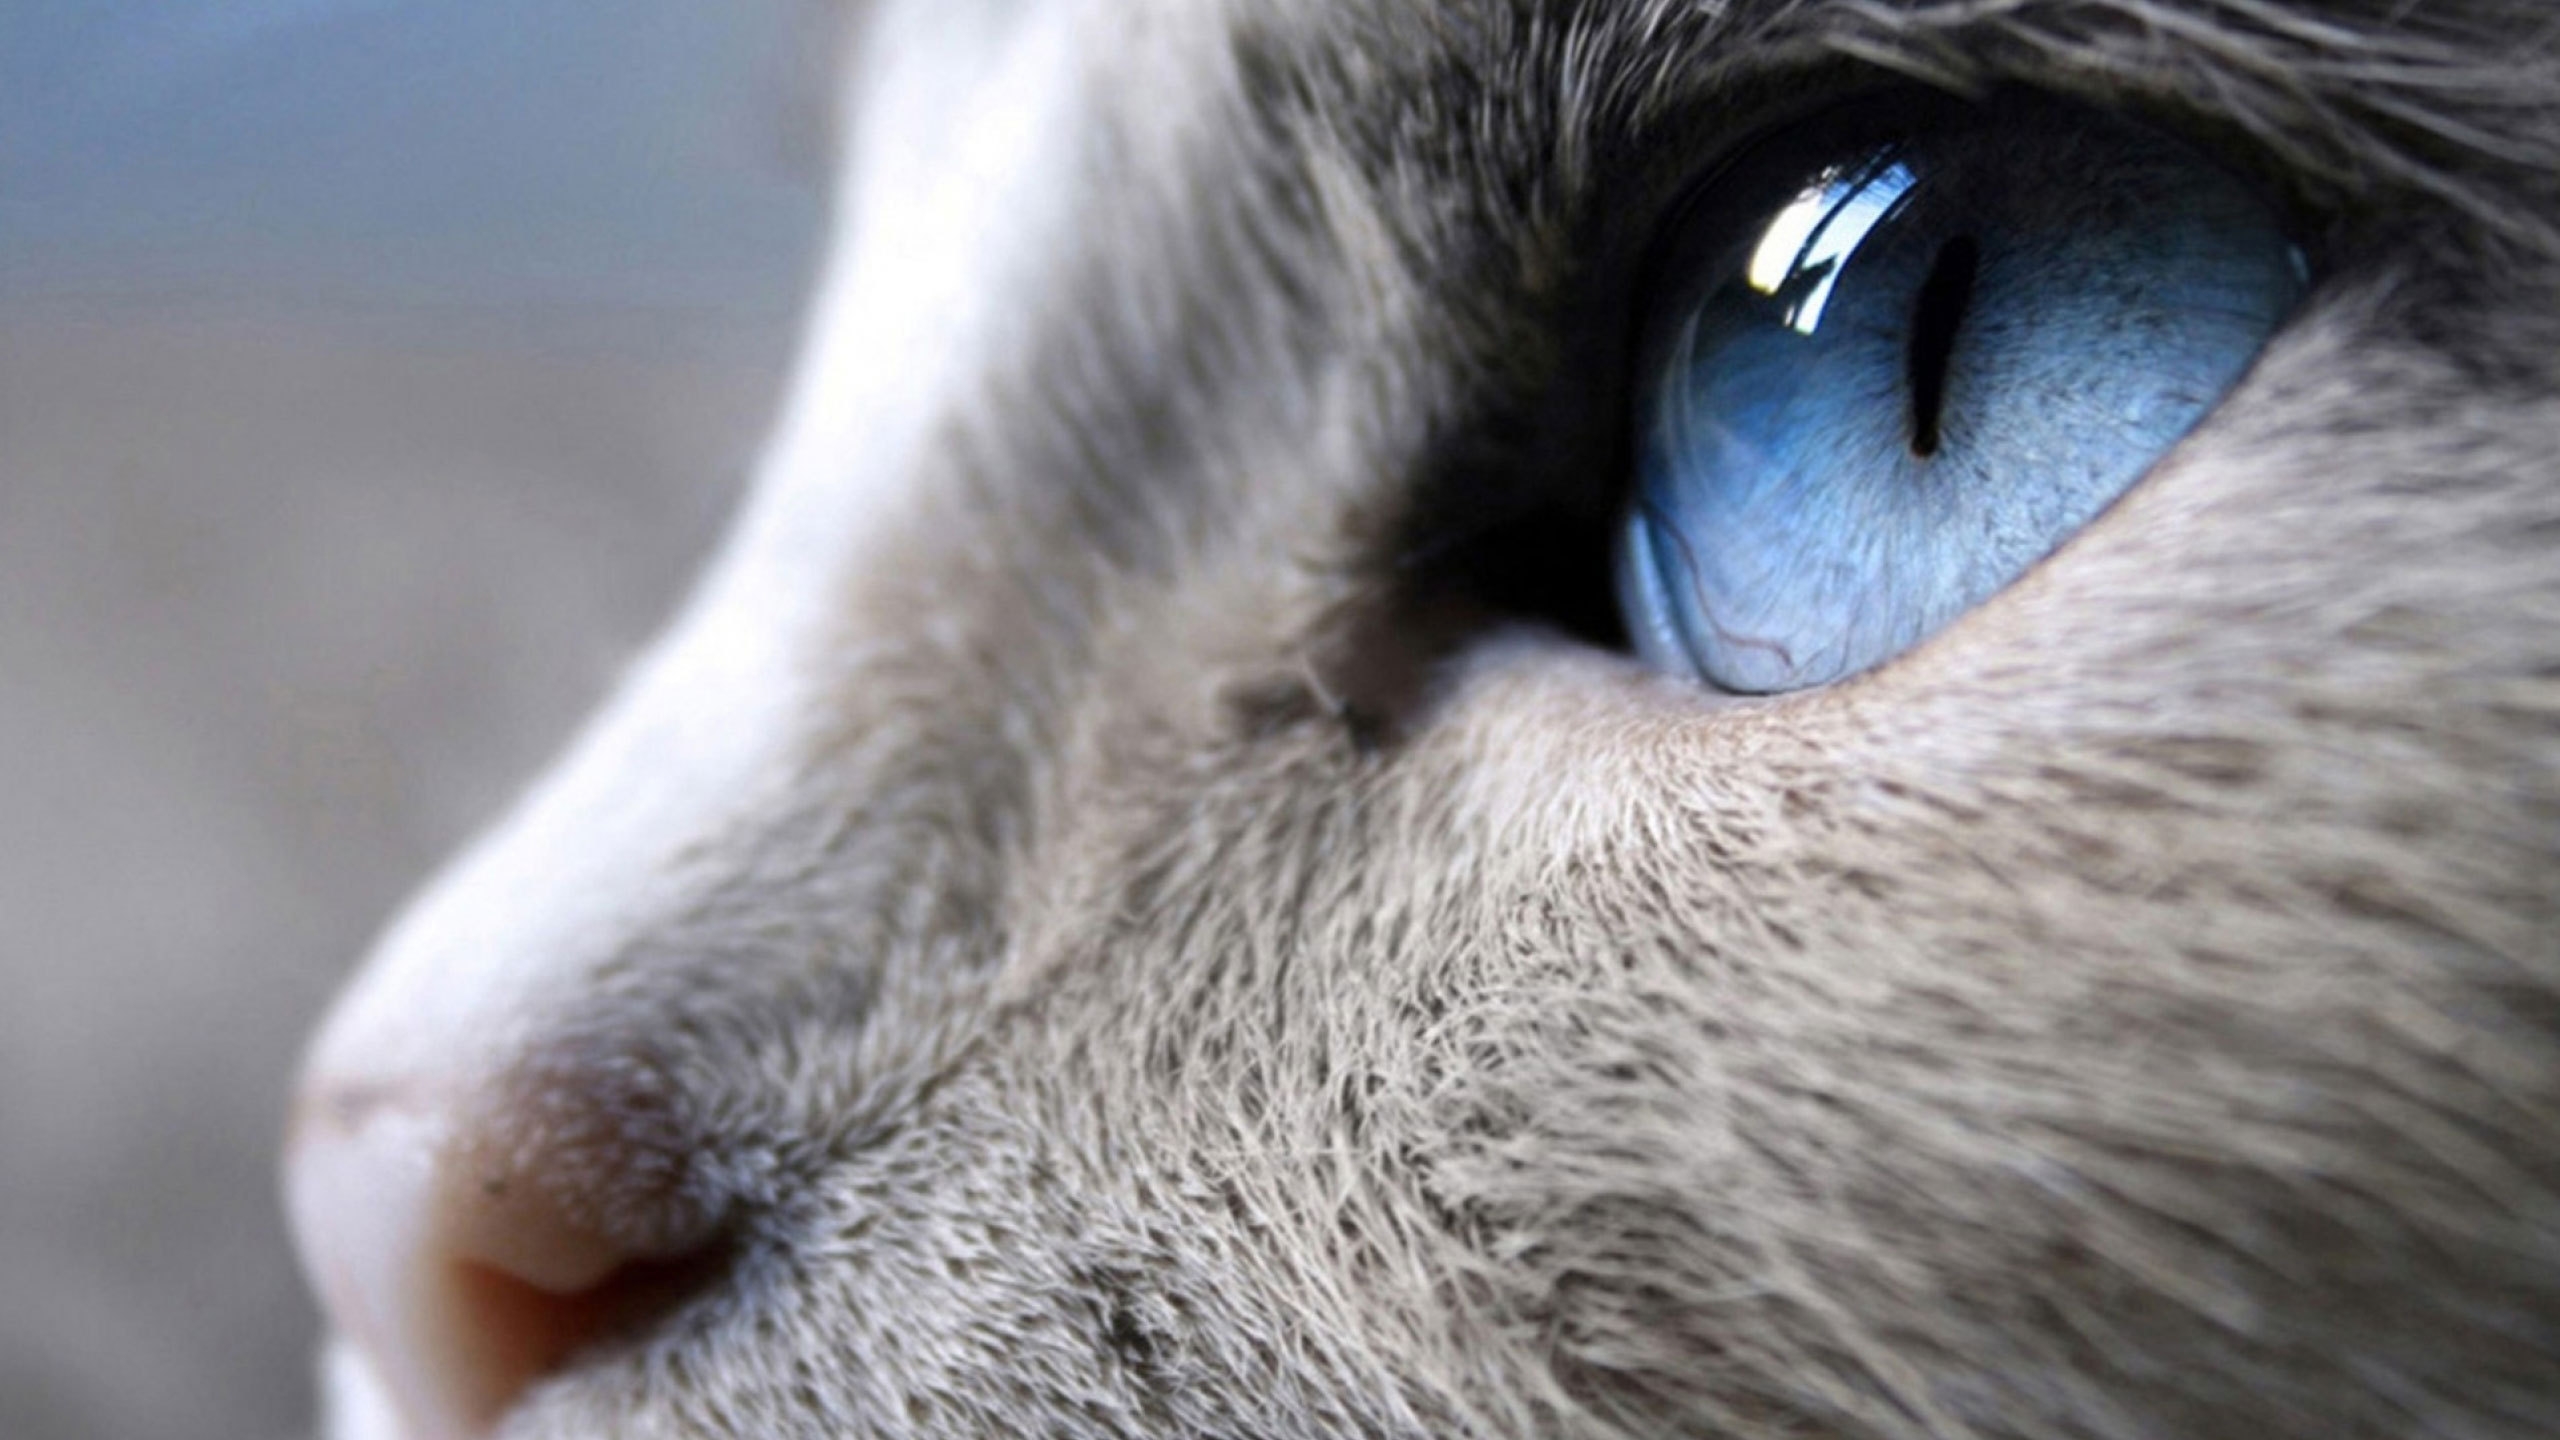 Incredible Siamese Cat Profile Look for 2560x1440 HDTV resolution